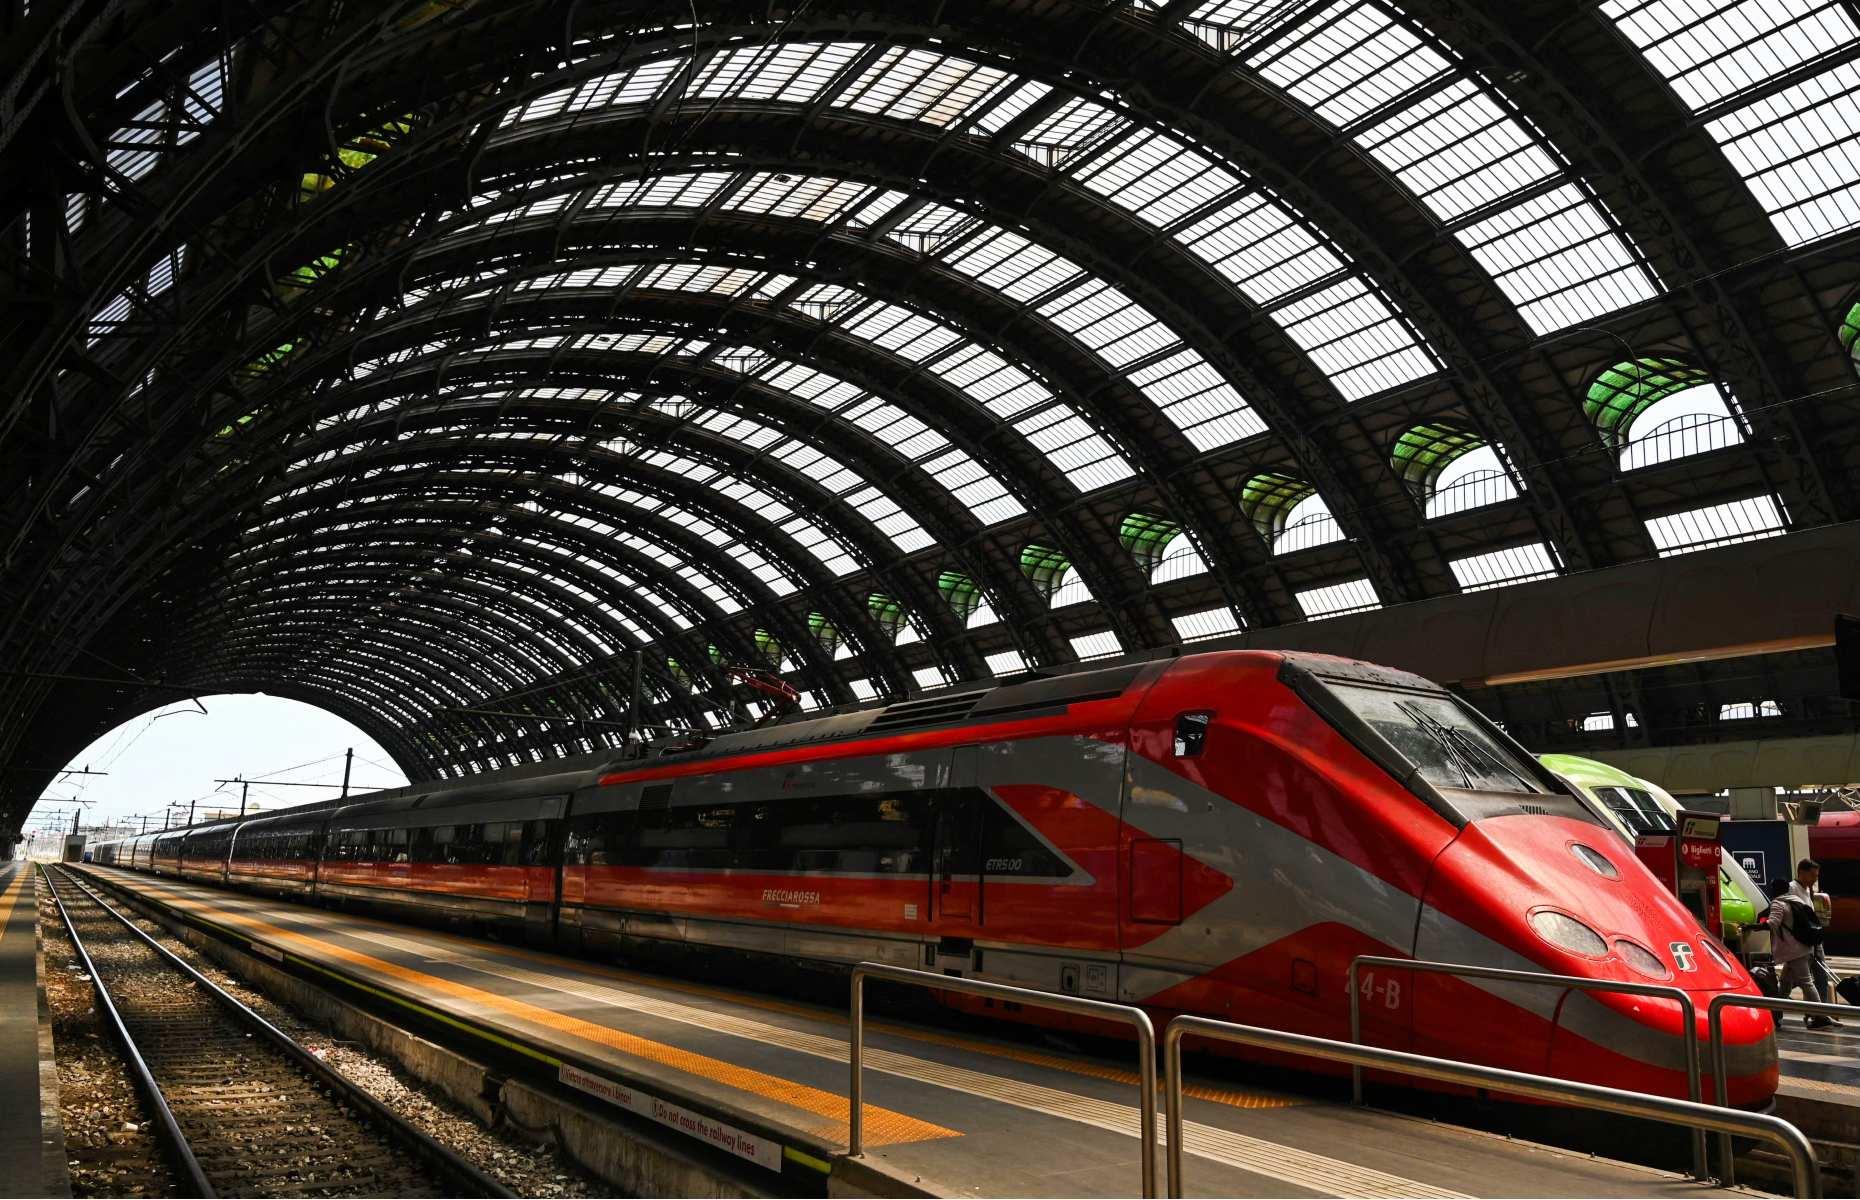 <p>Elsewhere, Trenitalia is in cahoots with Slovenia’s transport services to start a high-speed rail route from Milan (pictured) to Ljubljana, Slovenia’s gorgeously green capital. The two-and-a-half-hour trip between the two cities could open to passengers as soon as April 2024. Later this year, the zippy Frecciarossa trains will also tread through Paris, Madrid and Barcelona, as Trenitalia looks to increase its presence in France and Spain. This will be a boon to travelers crossing the Pyrenees, which has historically been low on rail services.</p>